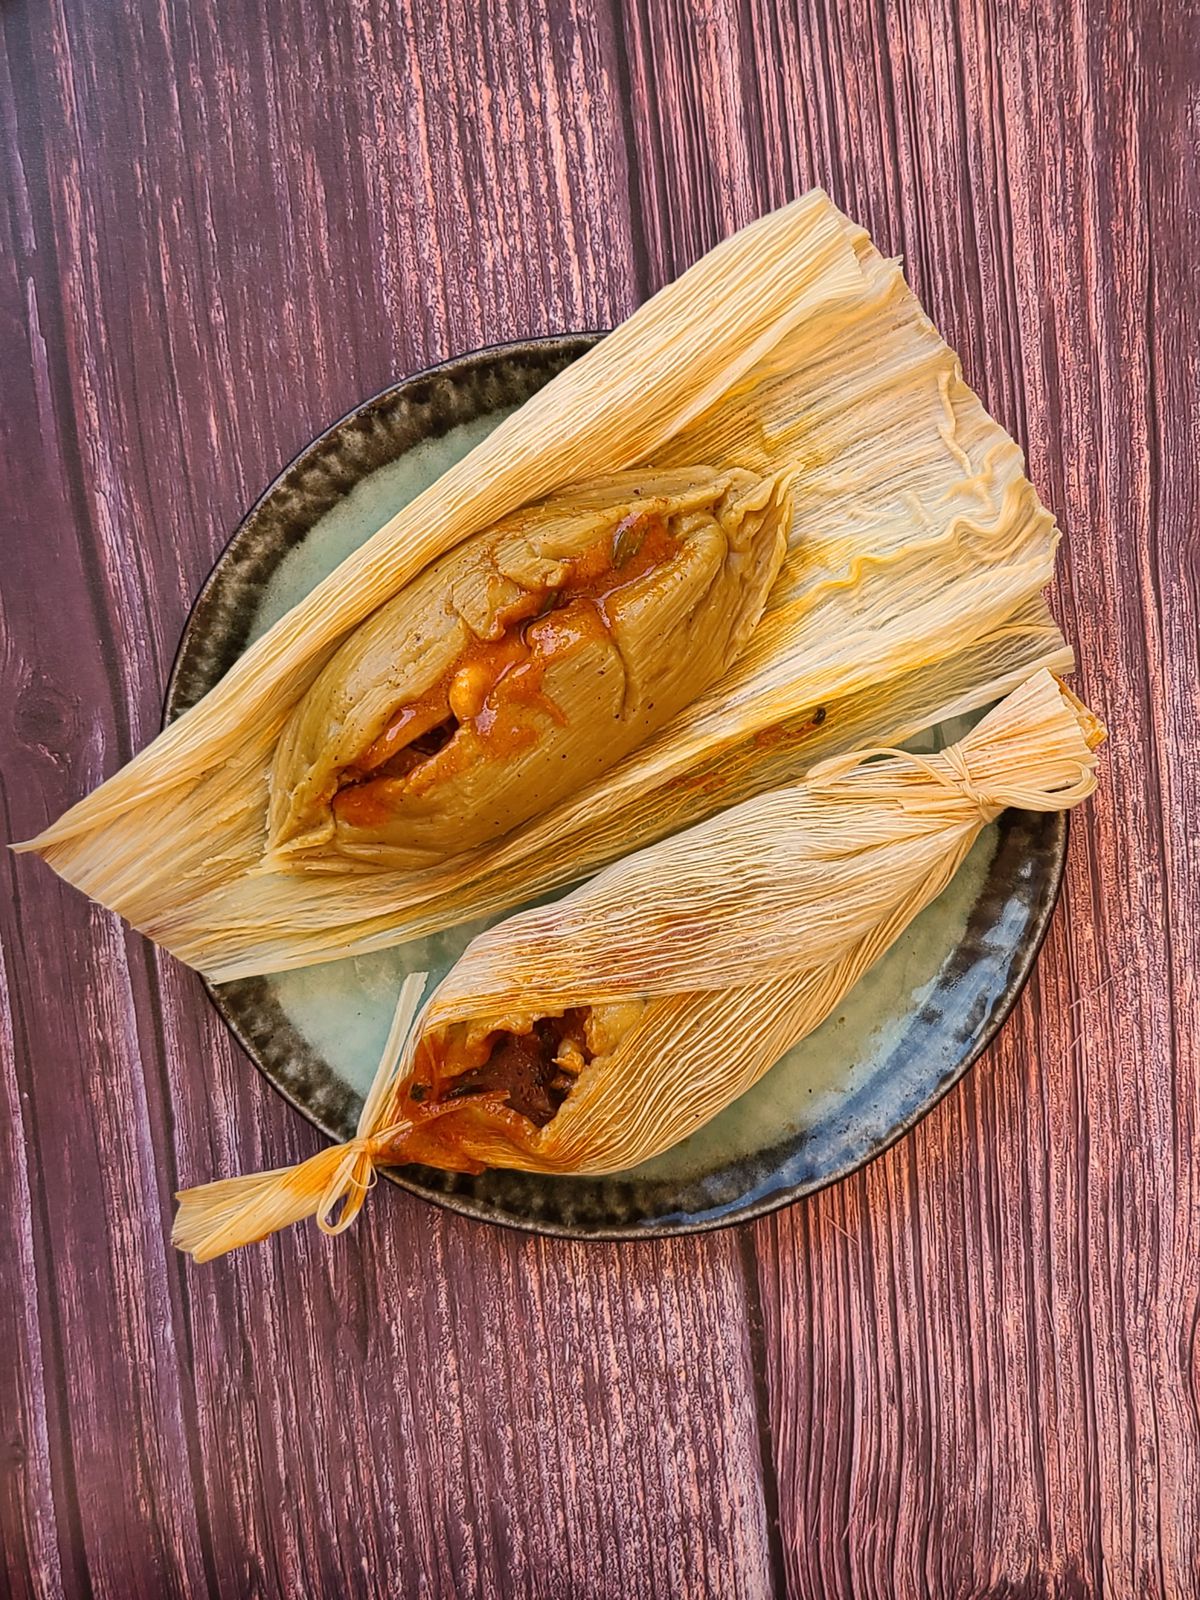 Two tamales de pesco, one partially unwrapped, on a plate.